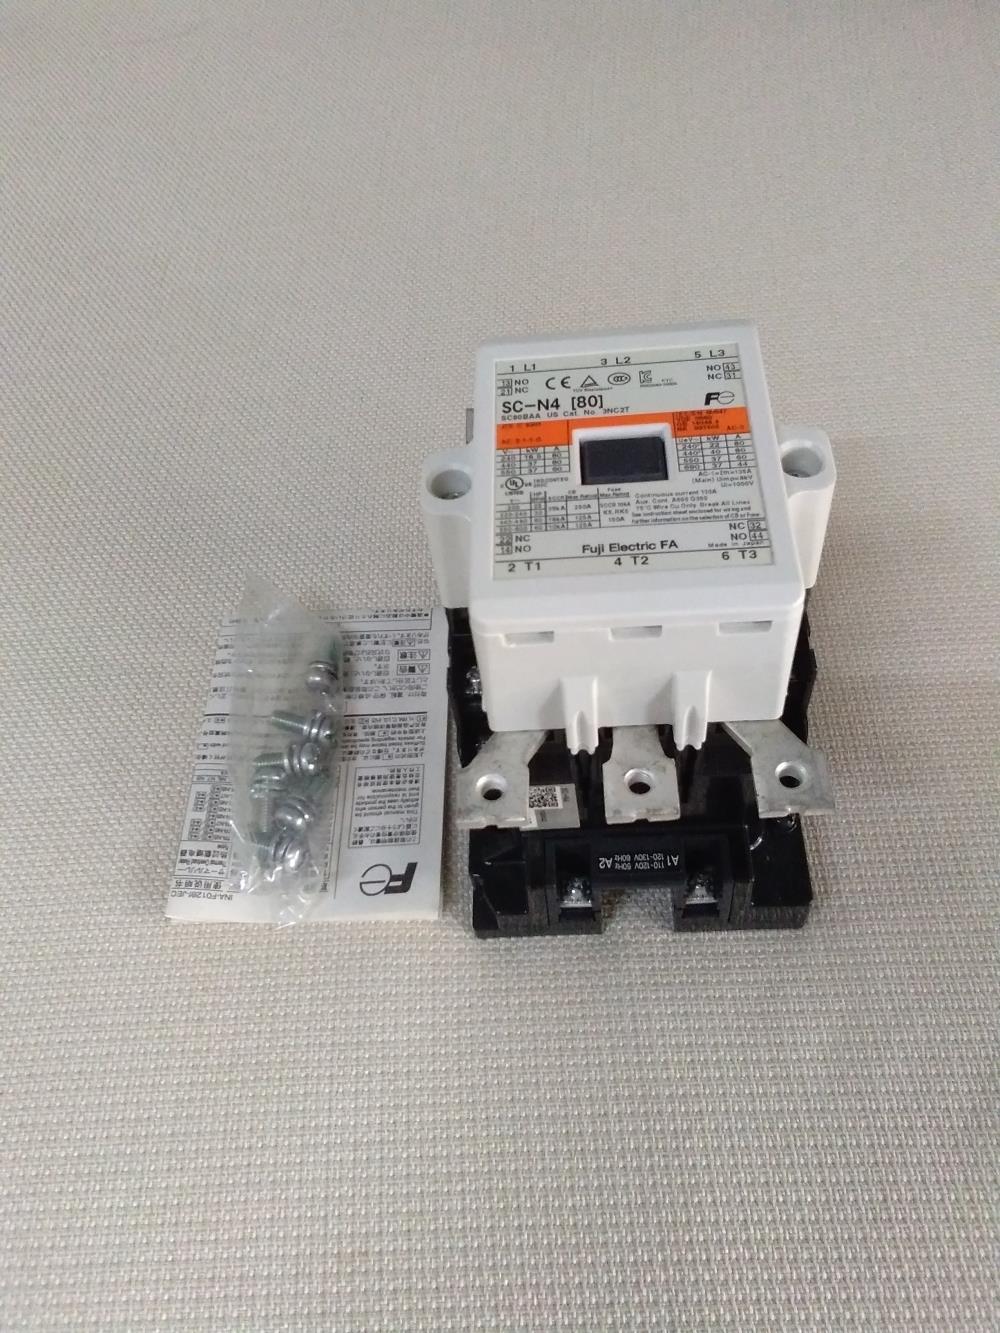 Fuji : Magnetic contactor : SC-N4, coil 110-120V , 2NO 2NC **ราคา 2,580.-**,นครราชสีมา  แมกเนติก  MAGNETIC CONTACTOR fuji SC-N4 coil 110 Vac โคราช,,Electrical and Power Generation/Electrical Components/Contactor